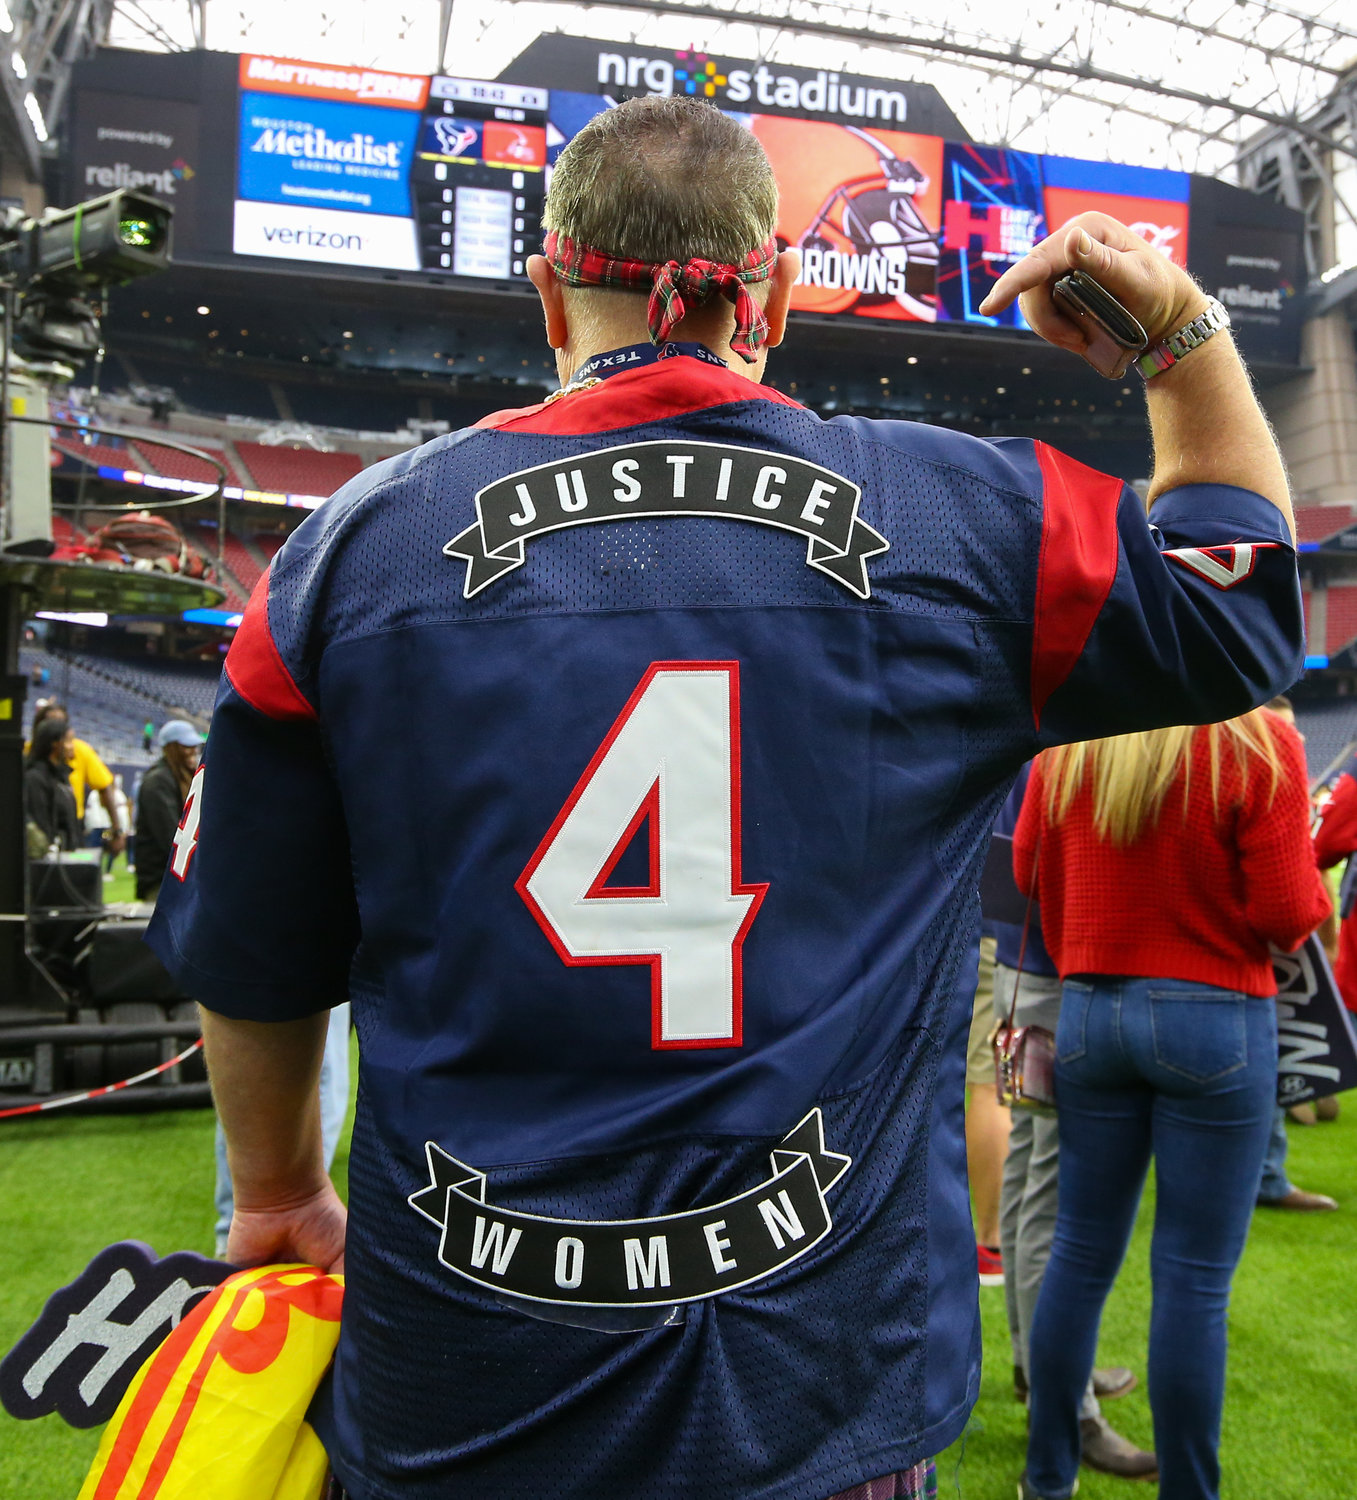 A Houston Texans fan wears Deshaun Watson’s former Texans #4 jersey with the slogan “Justice 4 Women” on the sideline ahead of an NFL game between the Texans and the Browns on Dec. 4, 2022, in Houston. The game marks the controversial quarterback’s return to Houston and first game back after an 11-game suspension for allegations of sexual misconduct during his tenure with the Texans.